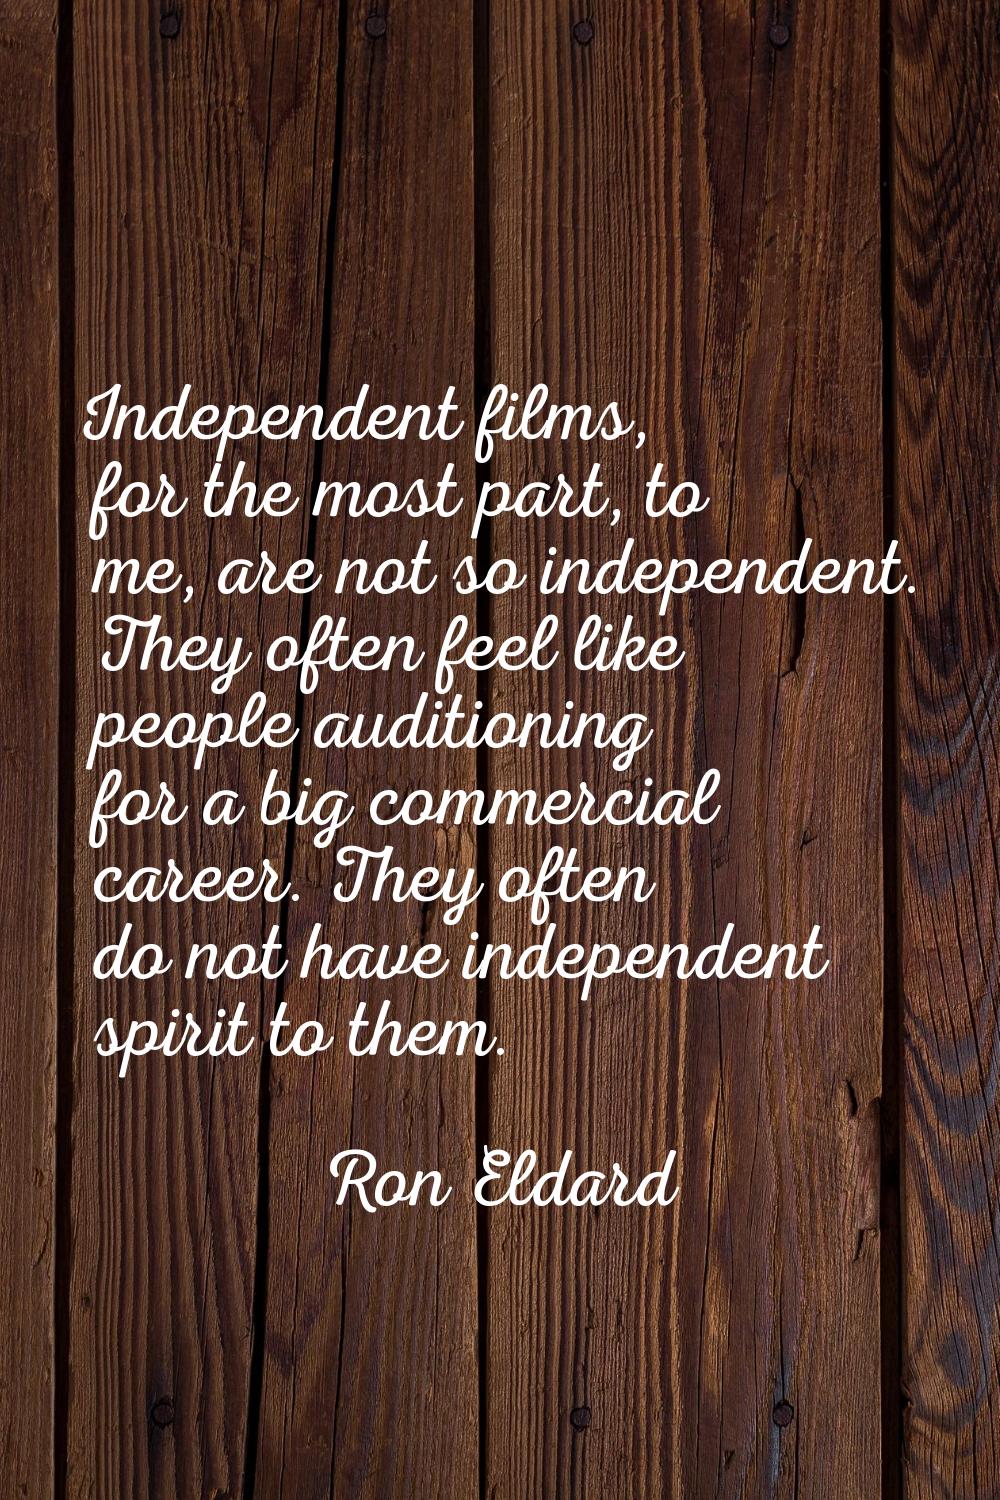 Independent films, for the most part, to me, are not so independent. They often feel like people au